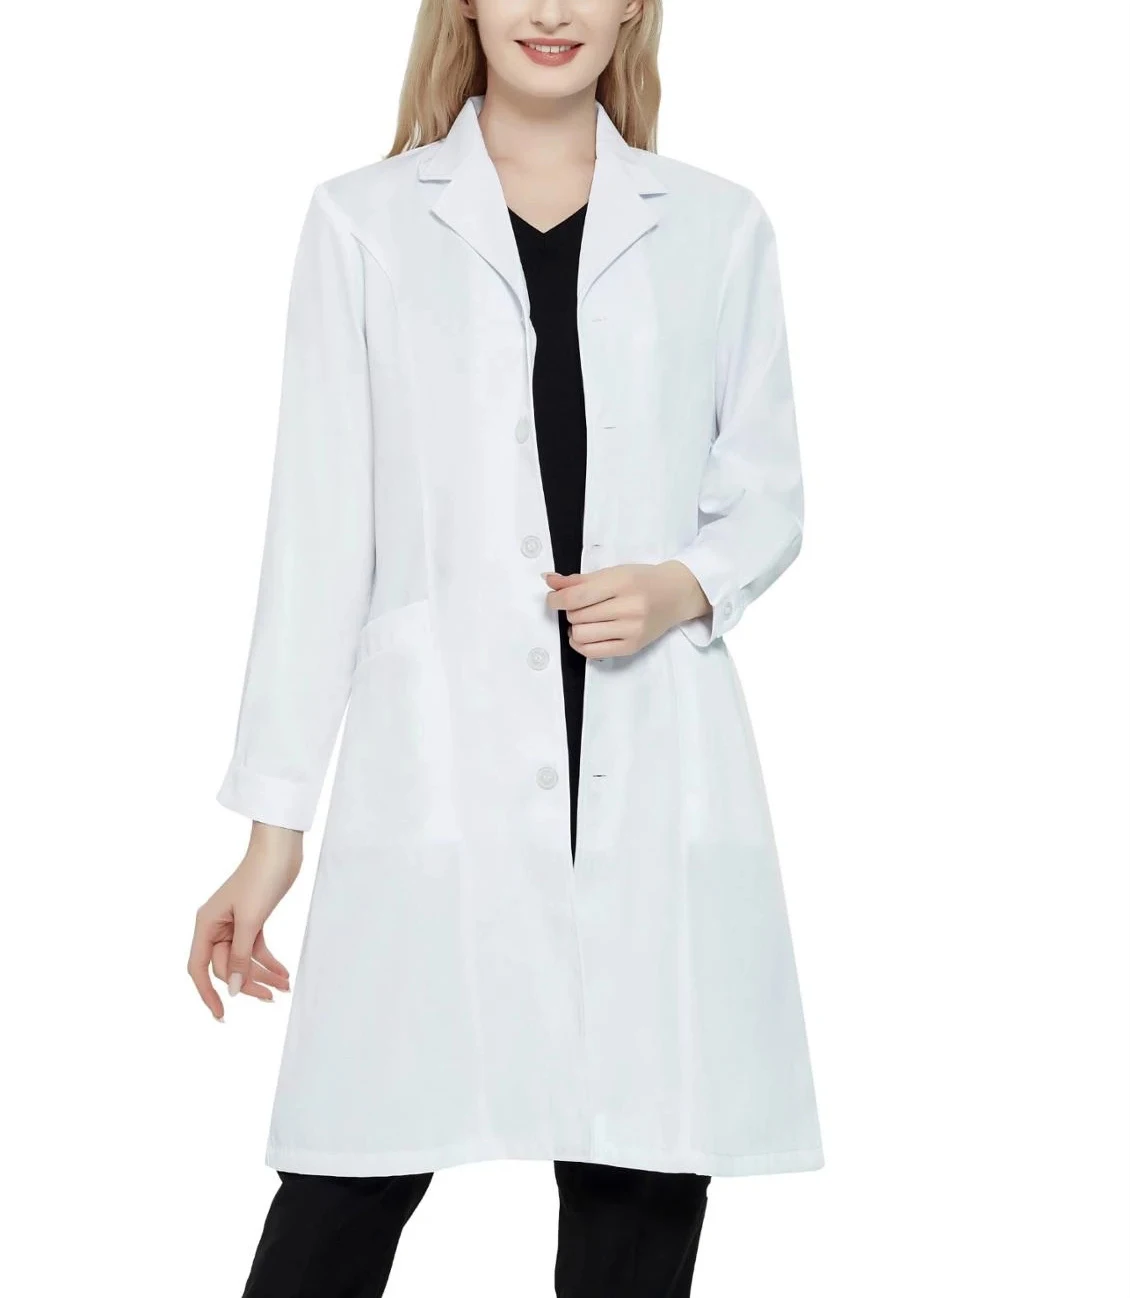 Professional Lab Coat for Women,White Medical Doctor Workwear,Slim Fit,3 Pockets 